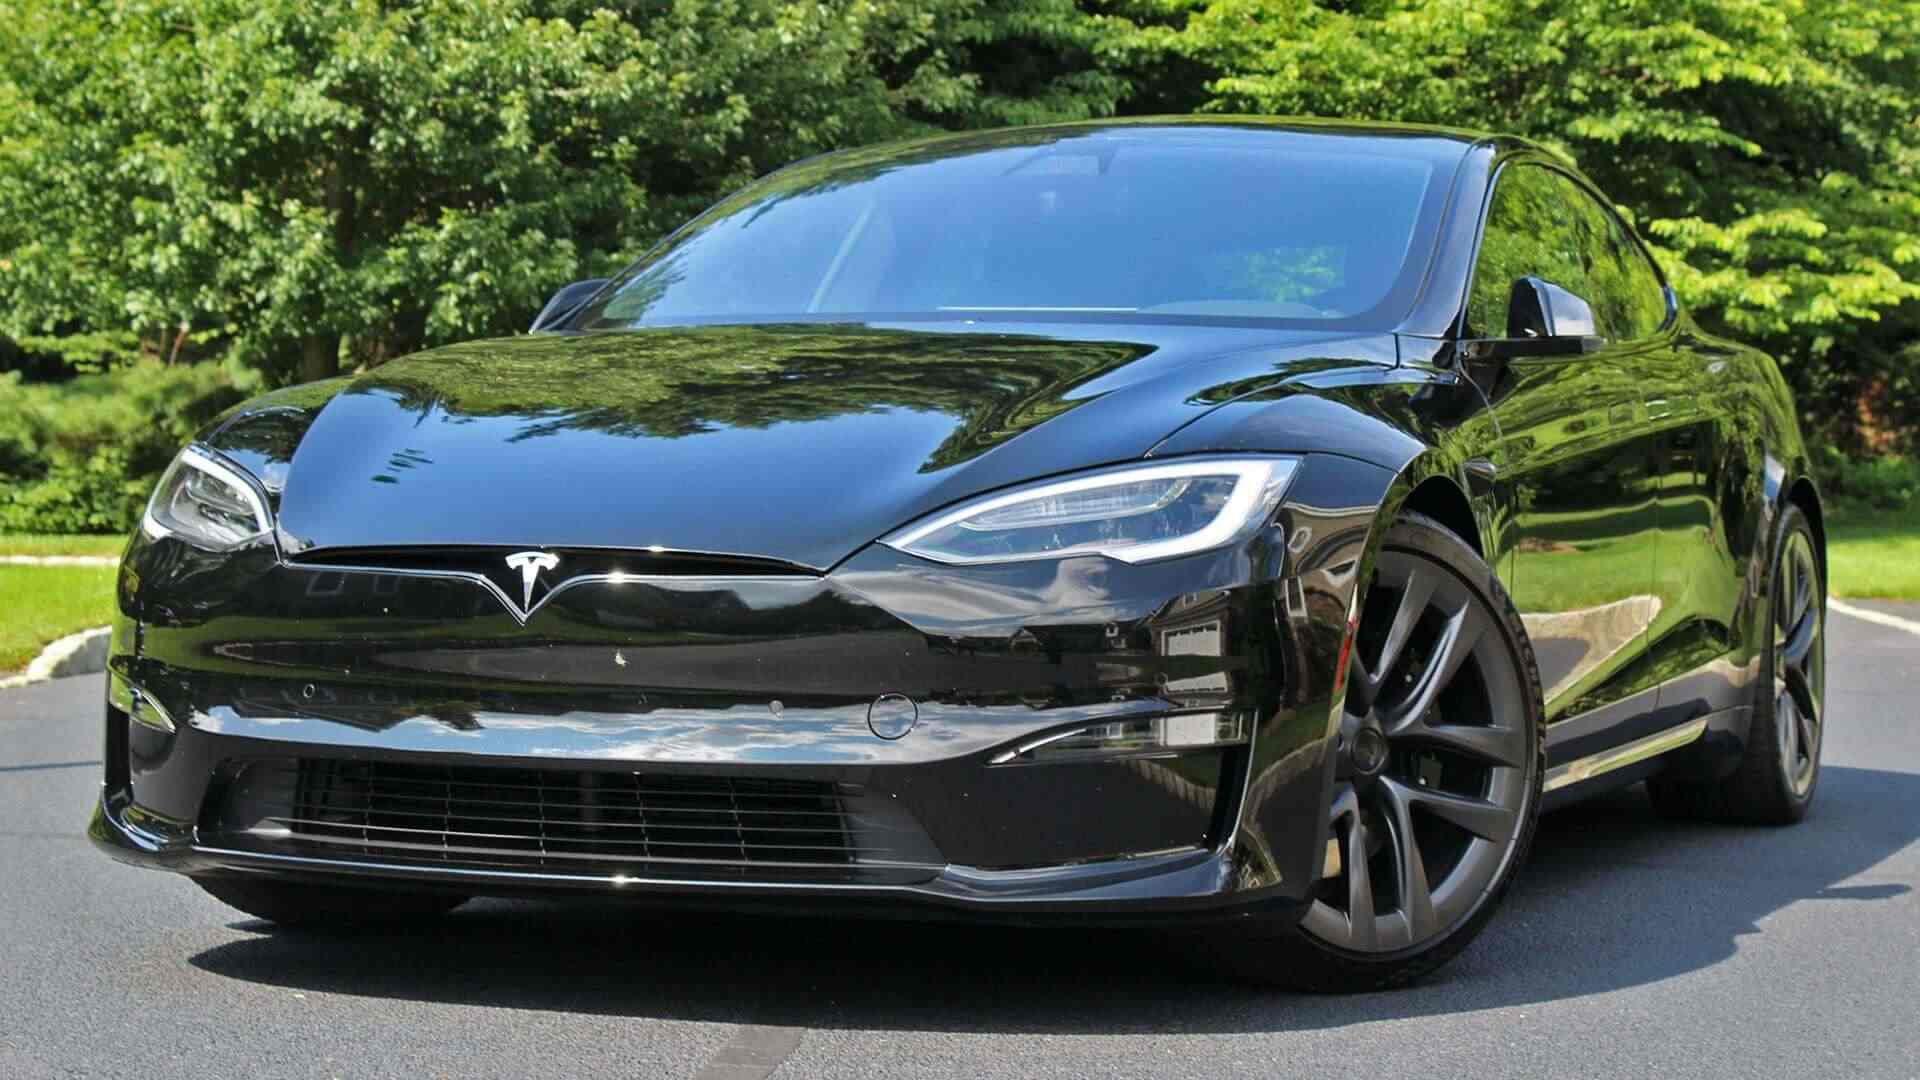 https://e-vehicleinfo.com/tesla-model-s-plaid-launch-in-china-price-details/